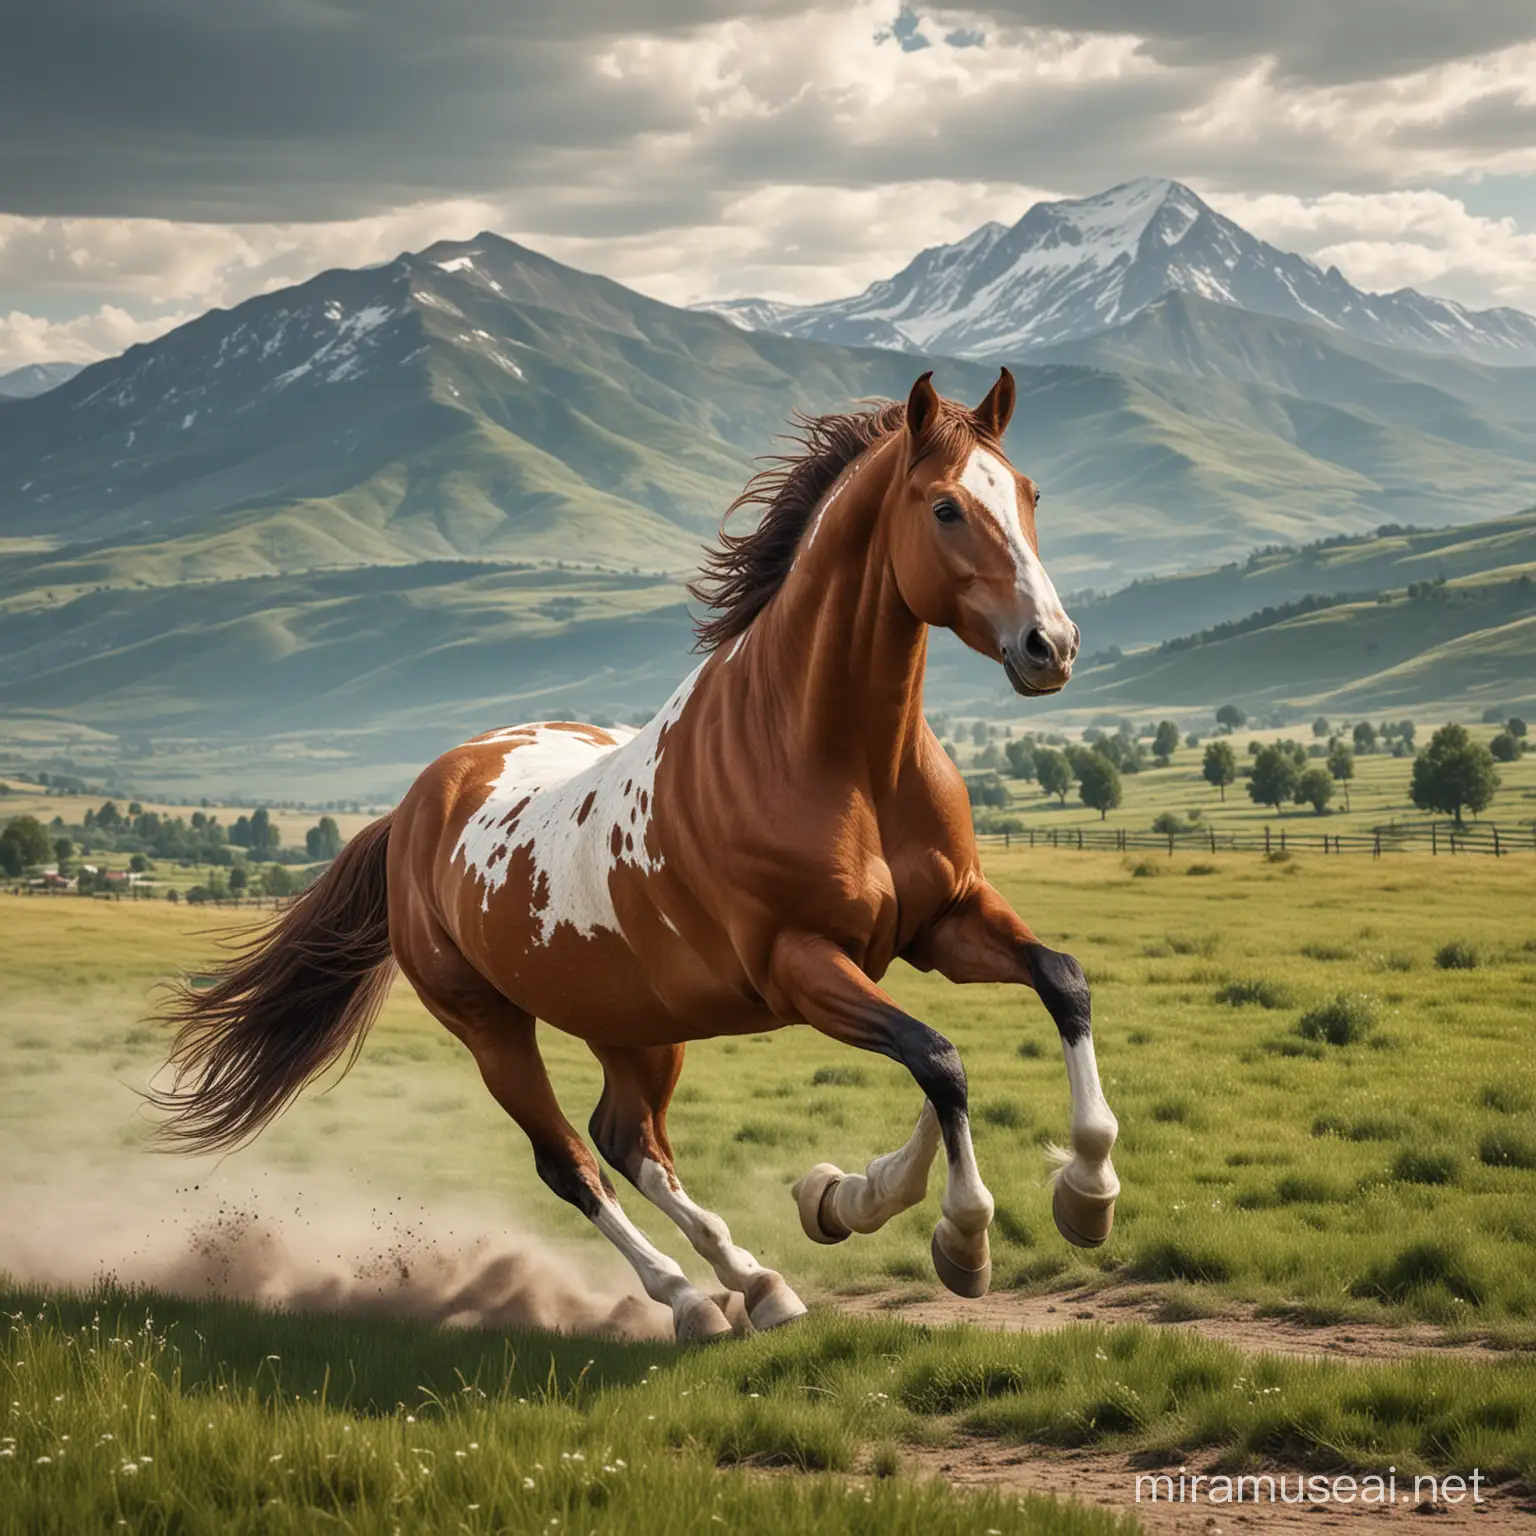 brown realistic horse with a lot of whit spots running on the countryside, the scenario is western-like open green field with mountains on the background